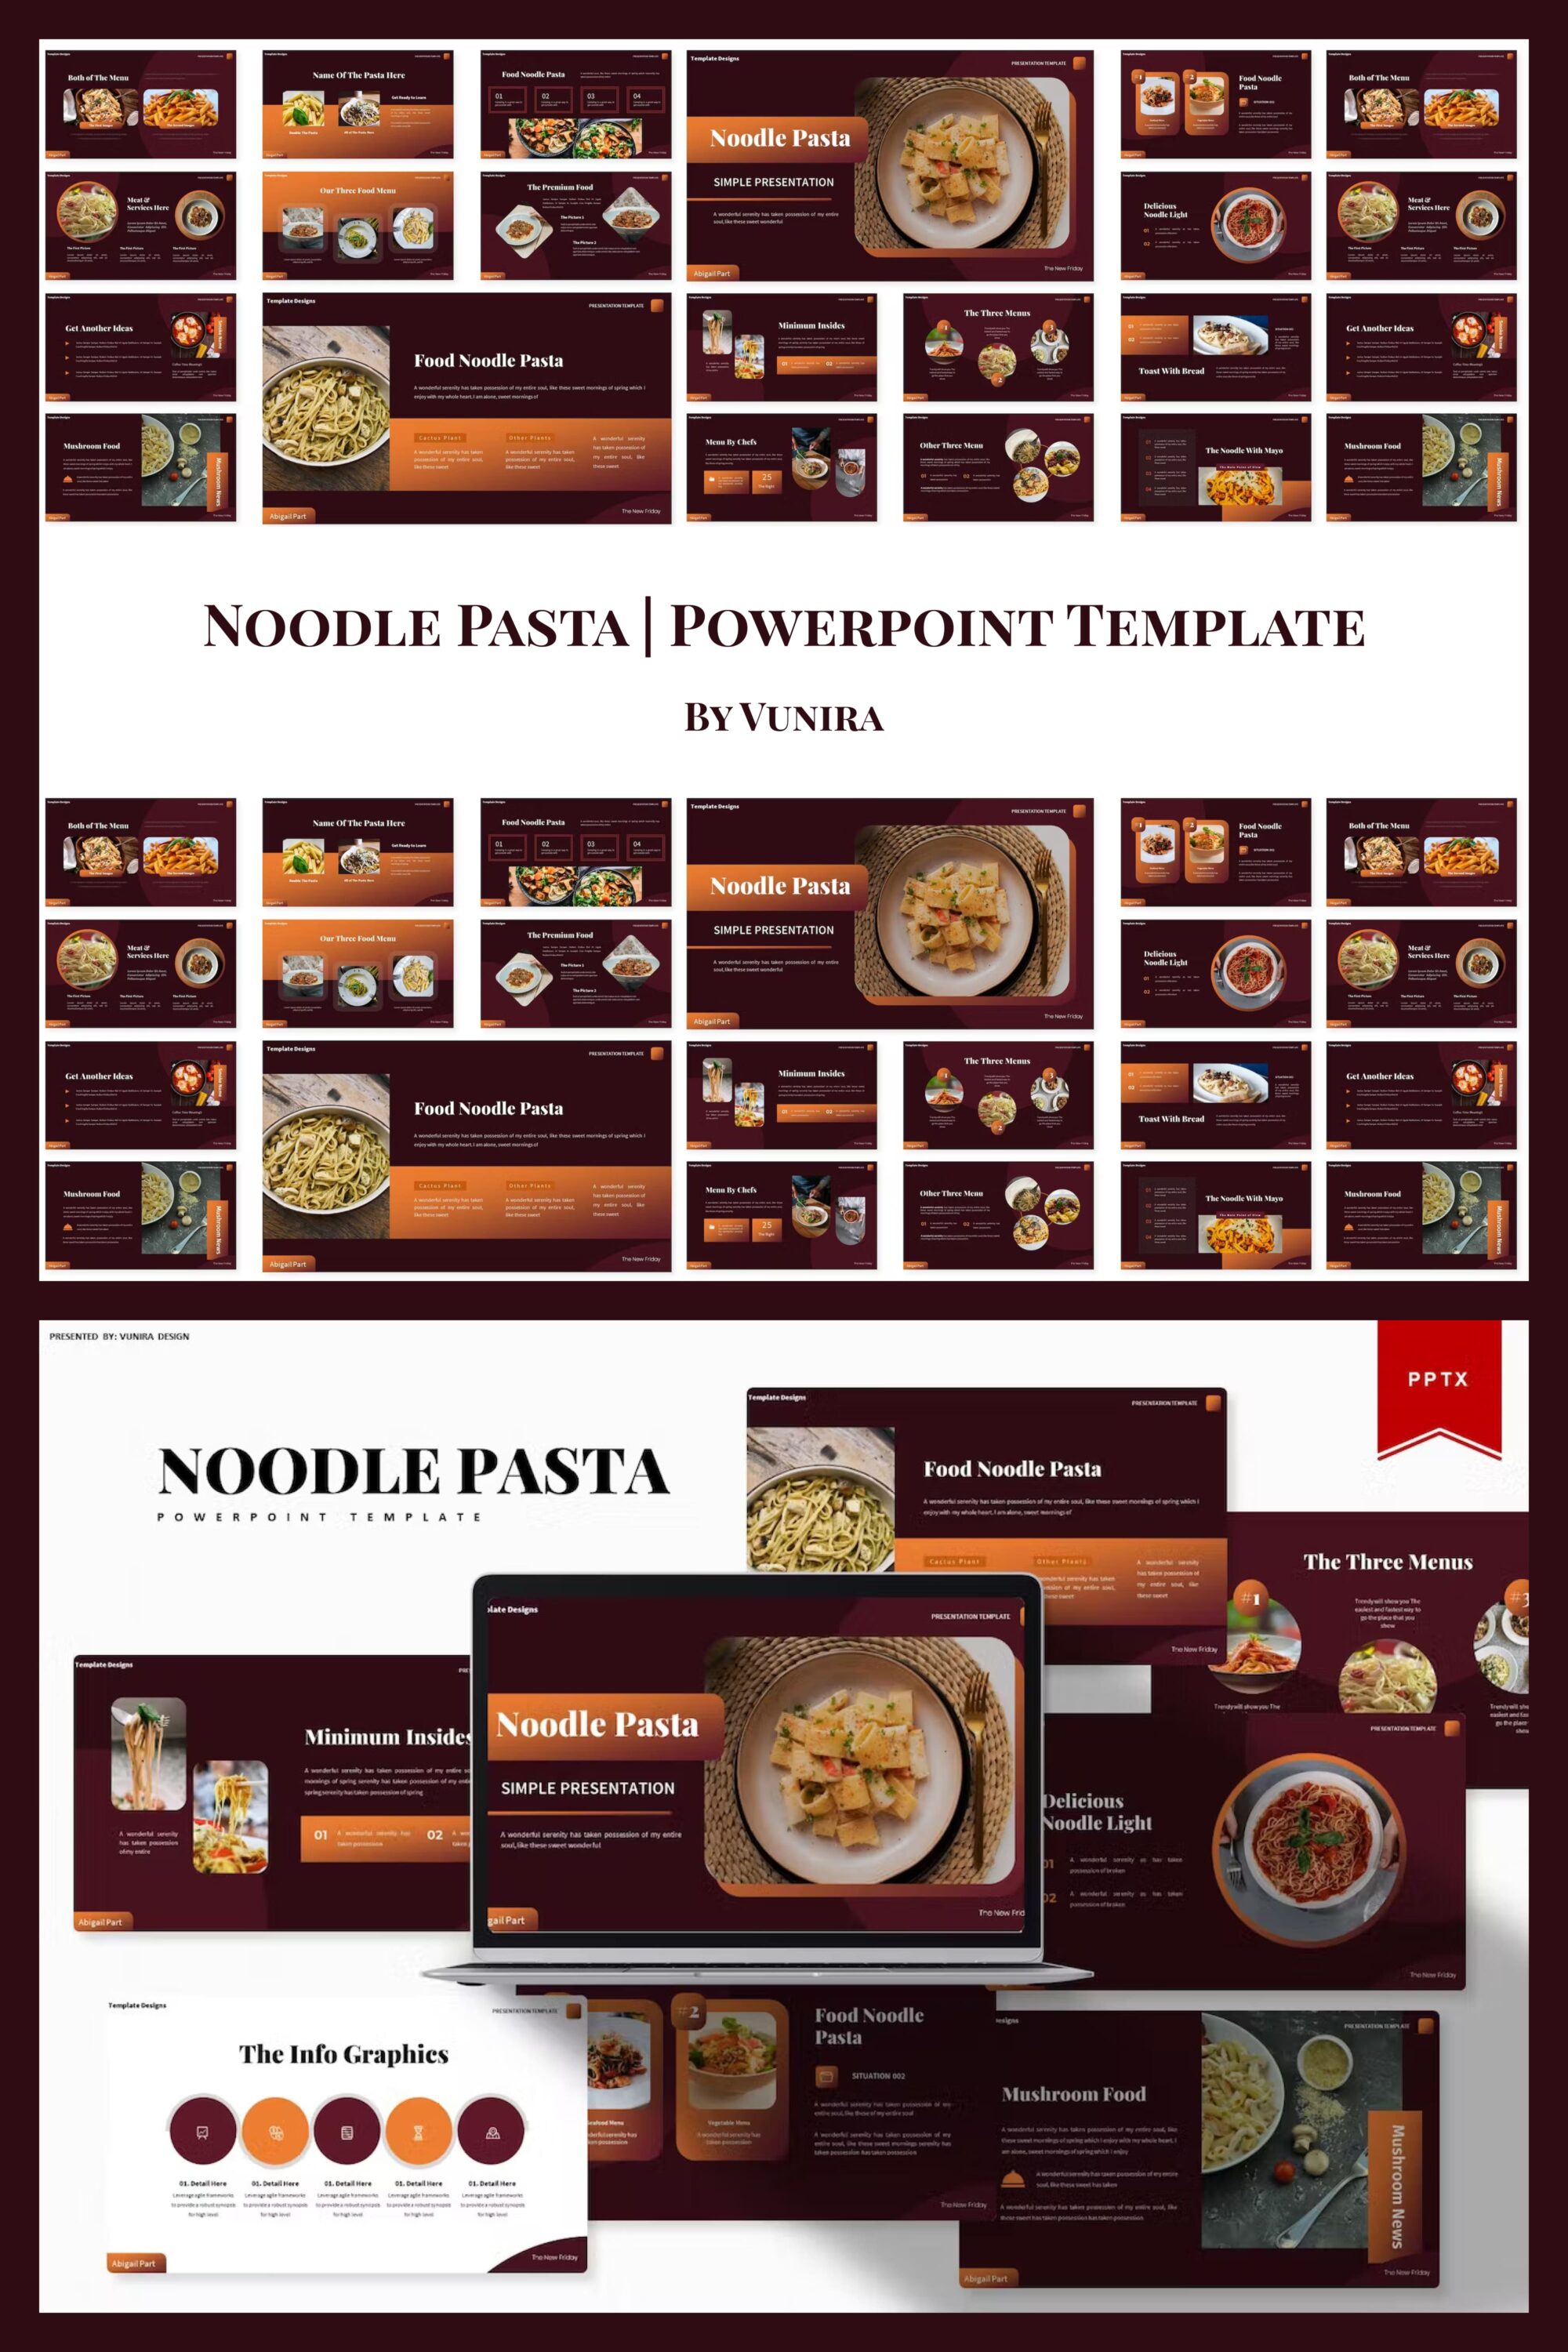 Noodle pasta powerpoint template of pinterest.